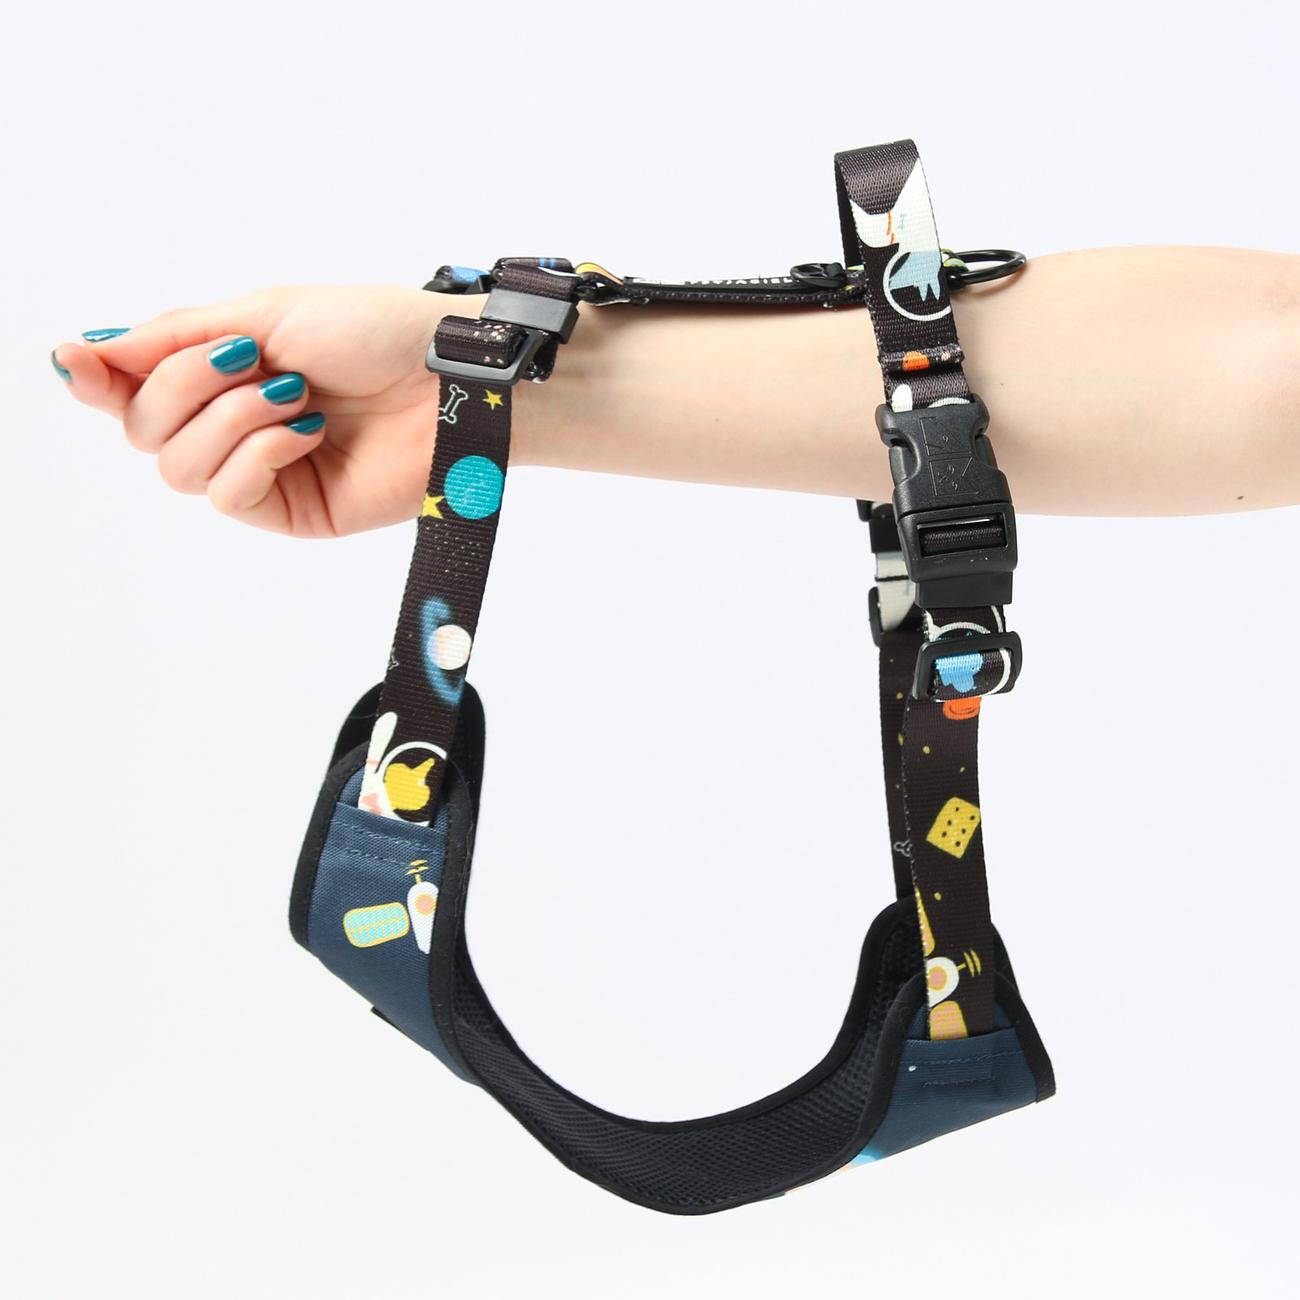 Stay-on pressure-free harness "I need space"